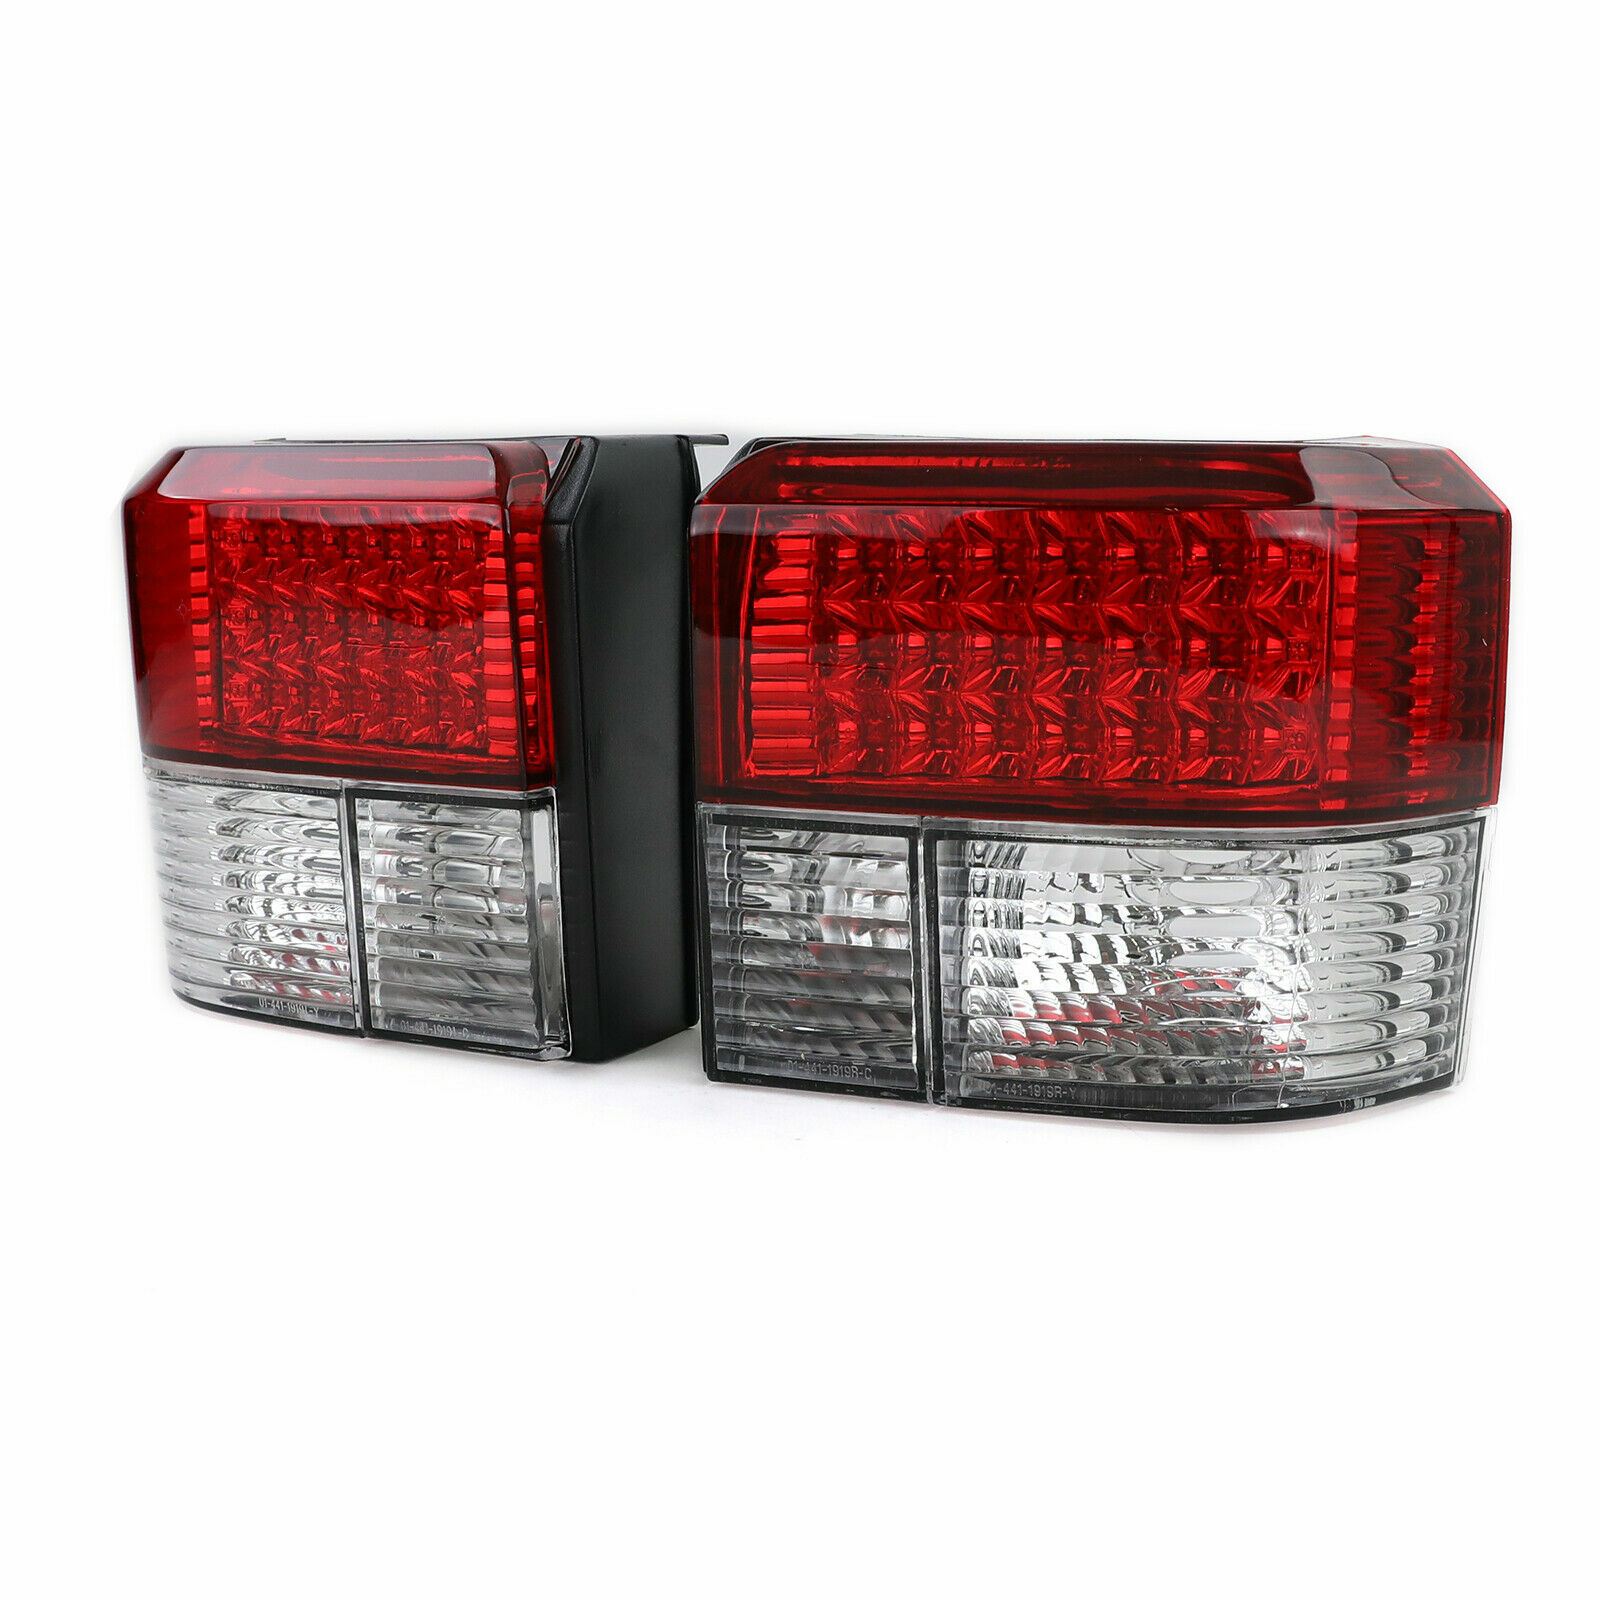 REAR TAIL LED BAR LIGHTS RED-CLEAR FOR VW BUS T4 90-03 MULTIVAN TRANSPORTER